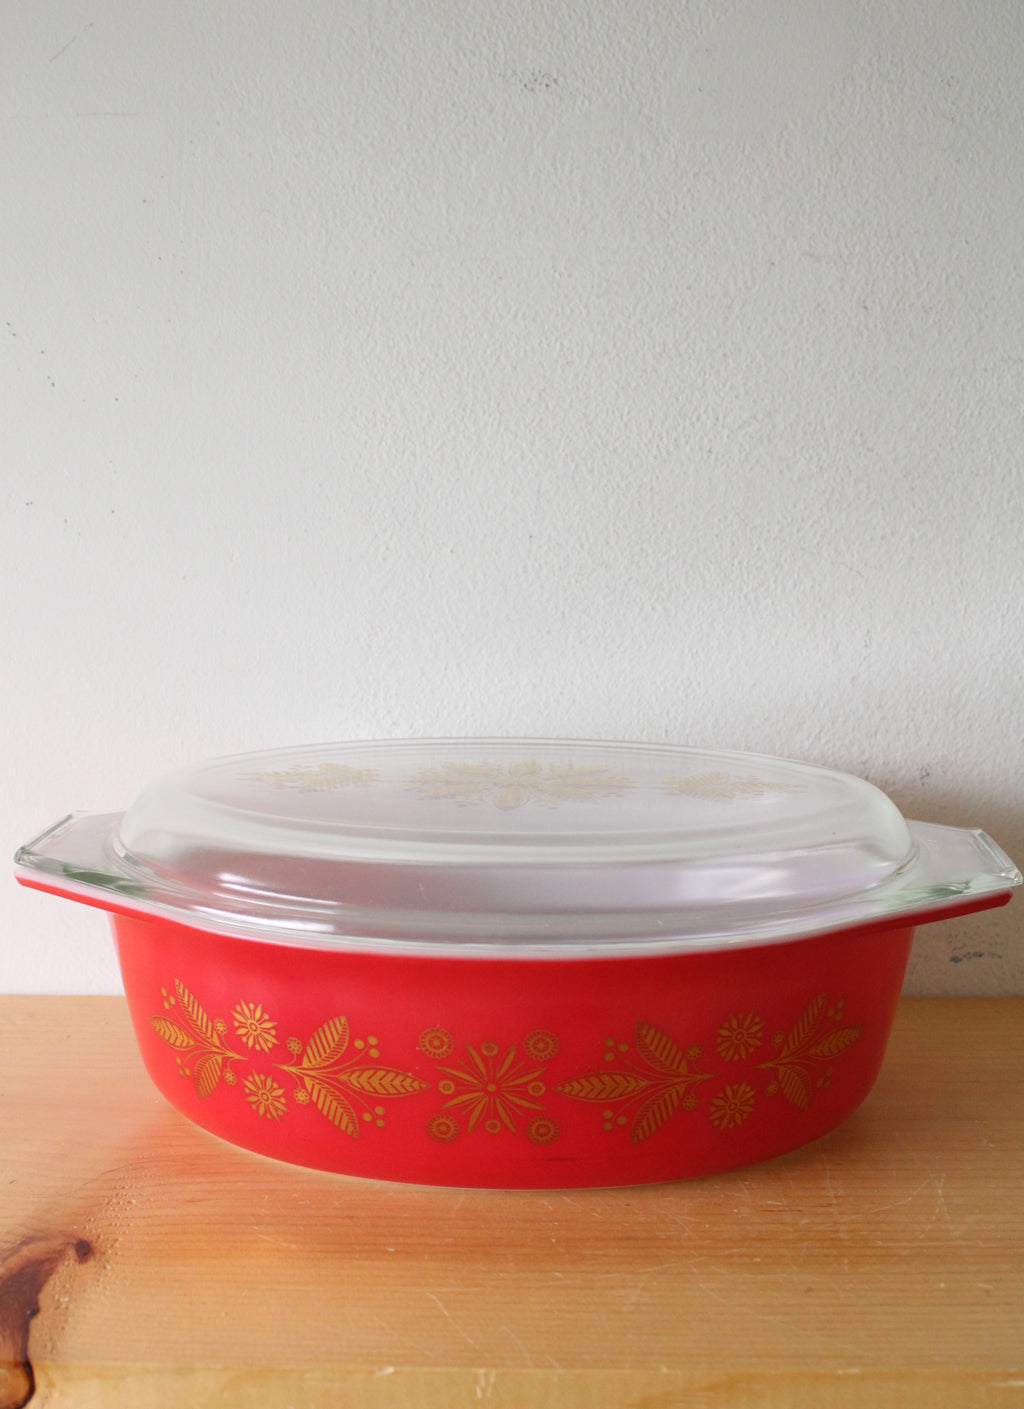 Pyrex 1961 Golden Poinsettia Covered Oval Red Painted Dish